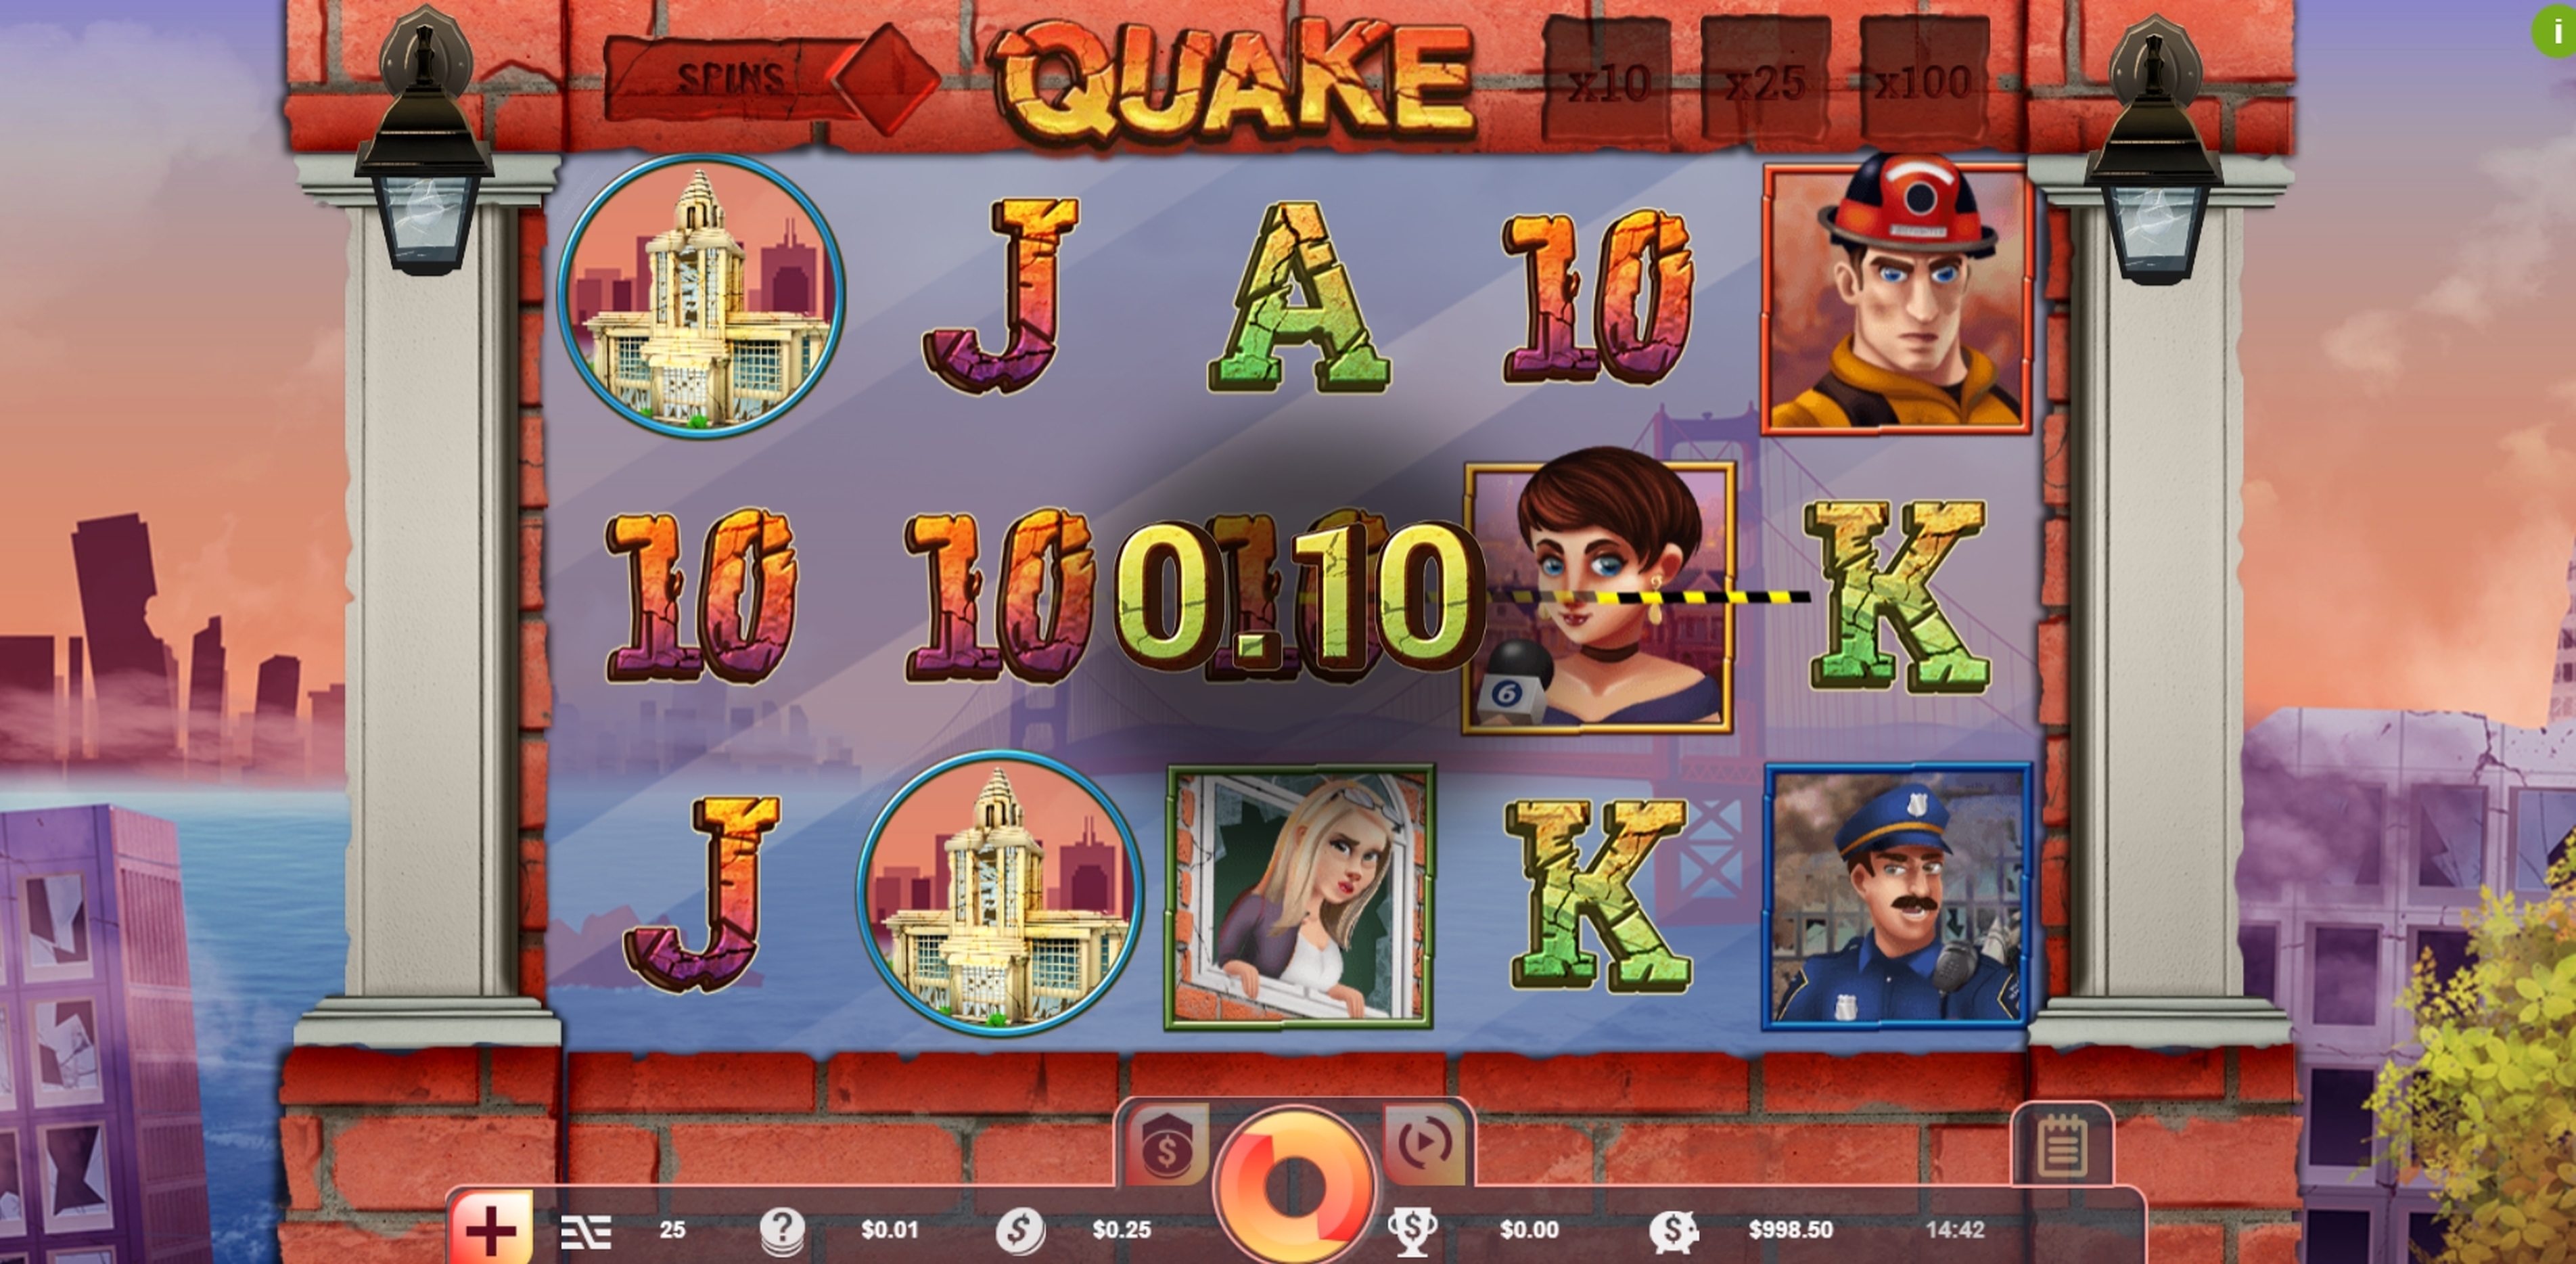 Win Money in Quake Free Slot Game by Vibra Gaming